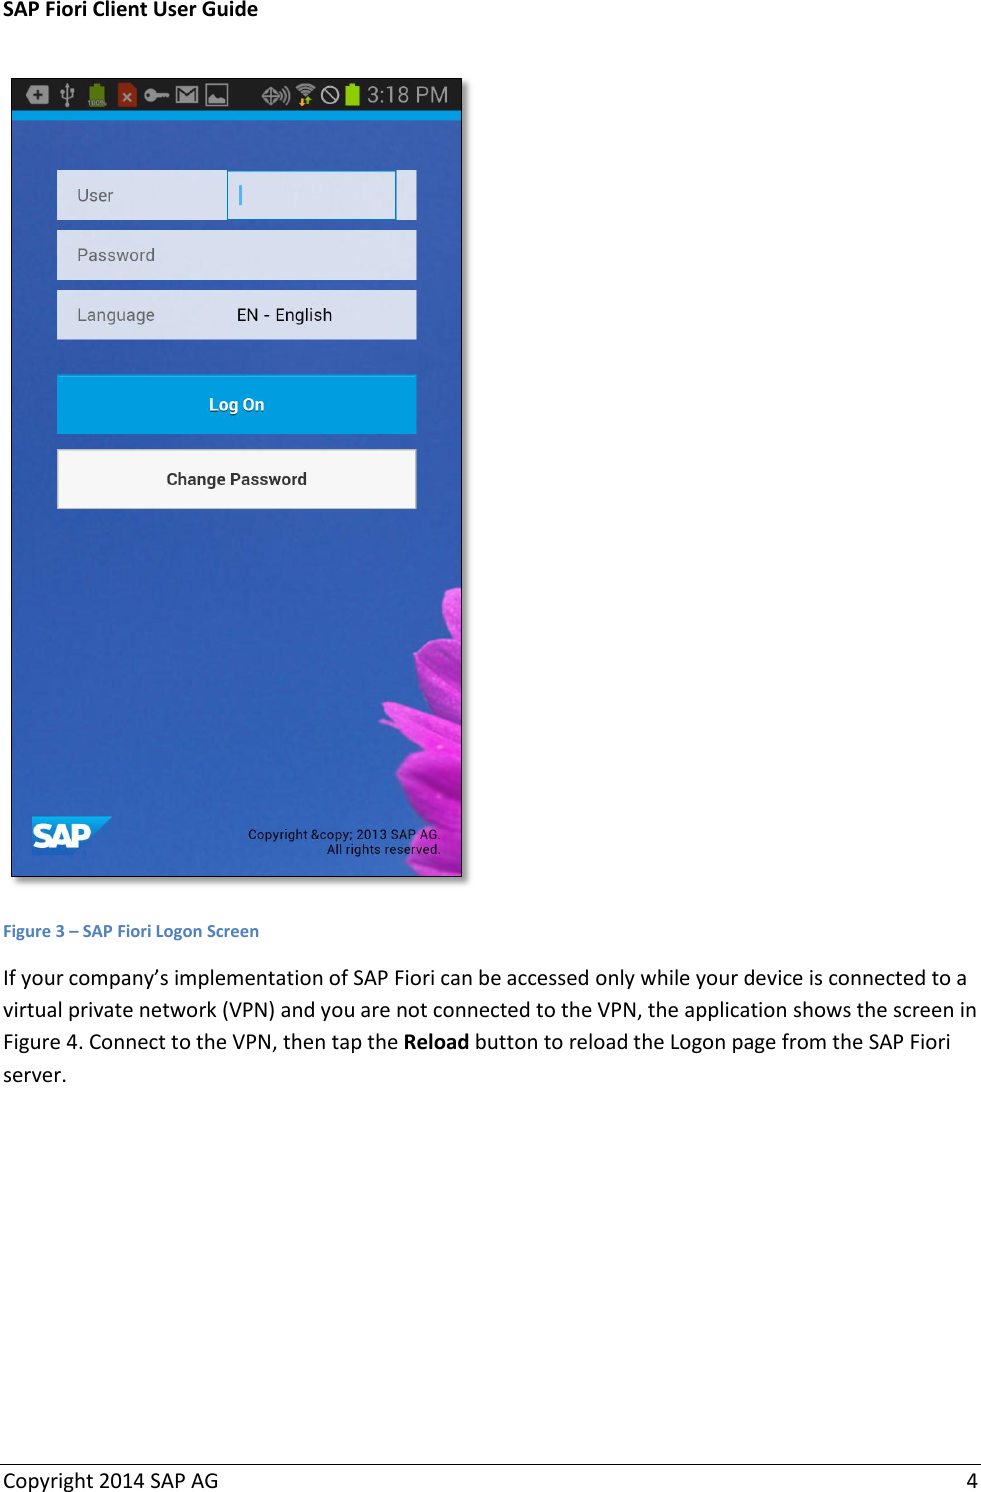 Page 5 of 12 - SAP Fiori Client User Guide